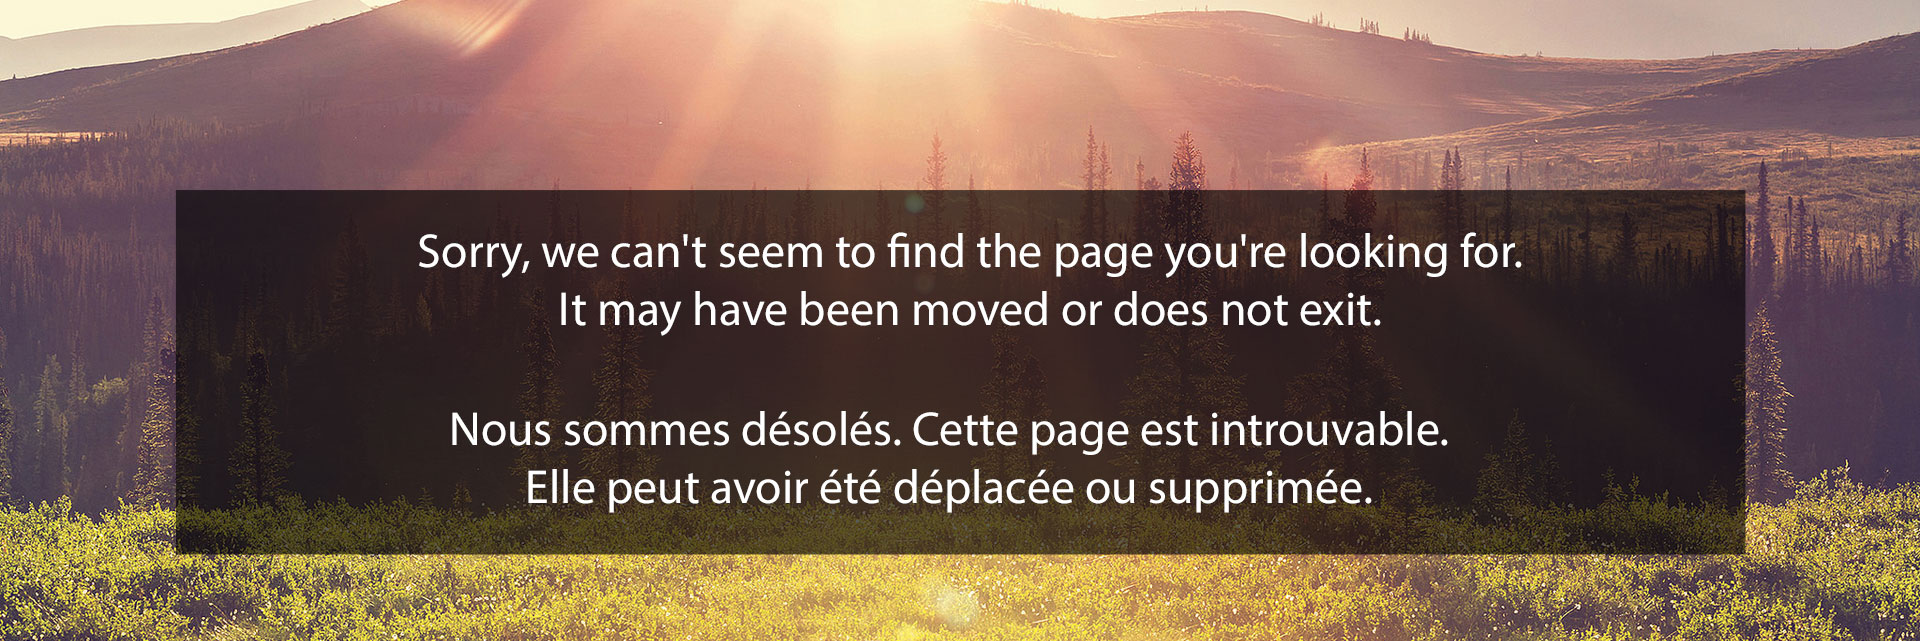 Sorry, we can't seem to find the page you're looking for.